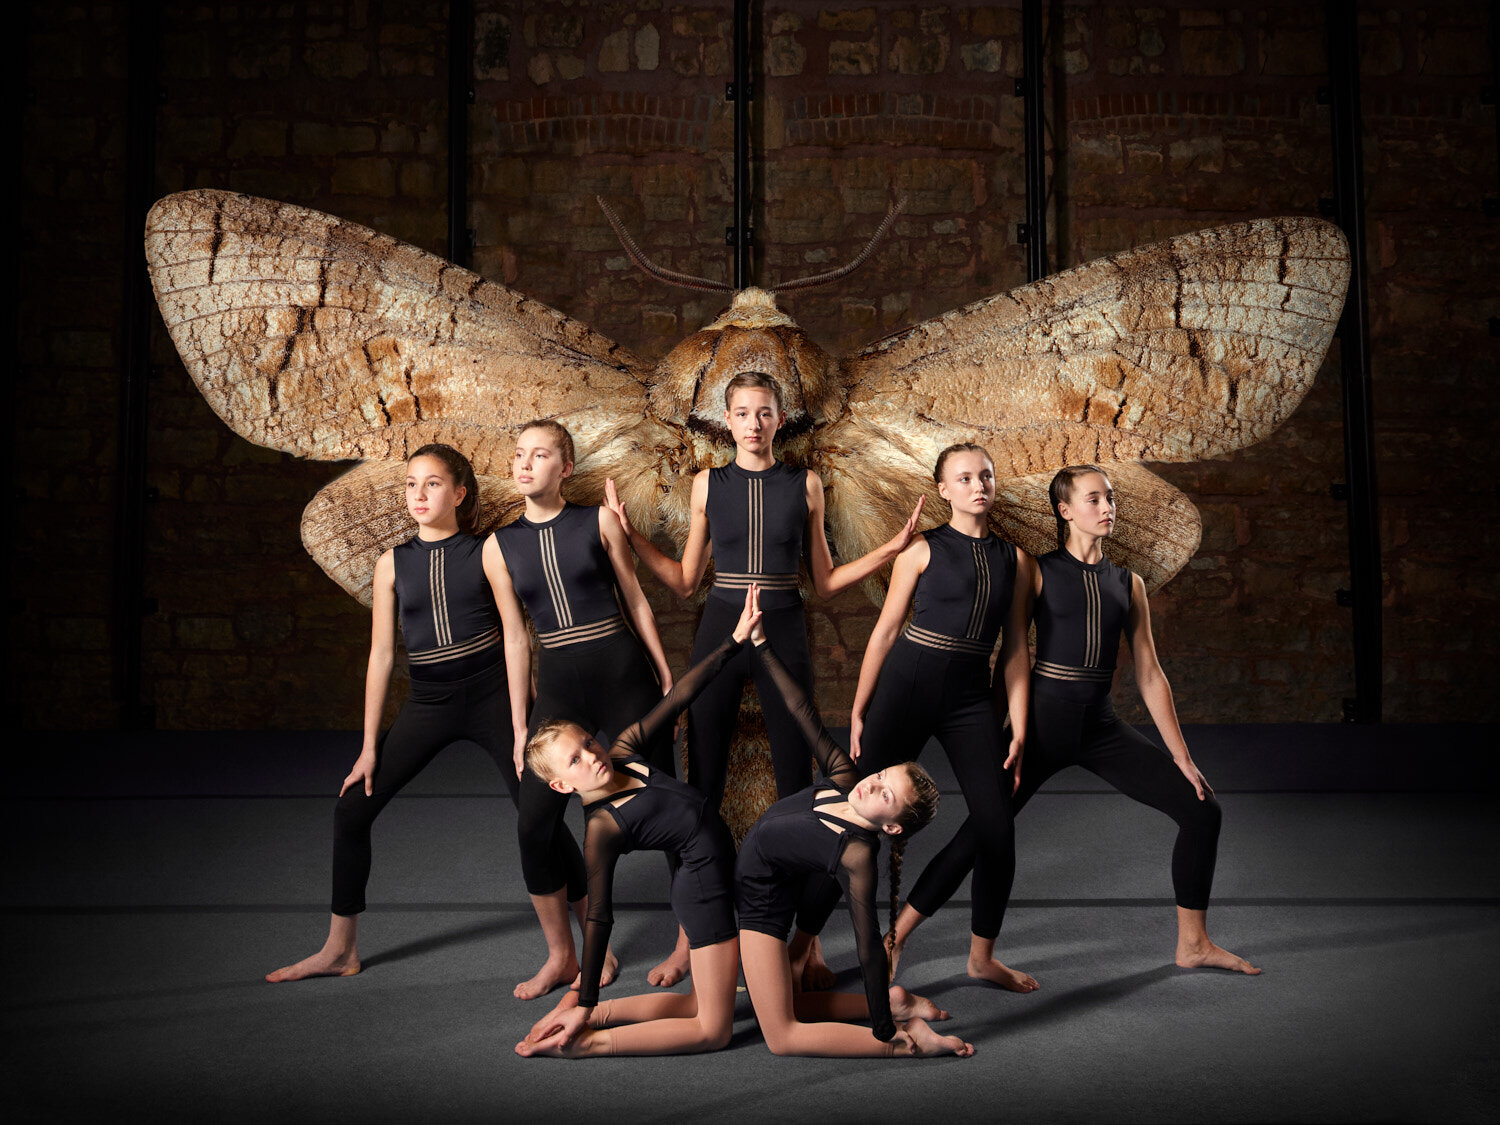 conceptual photo of circus performers and giant moth for Bricolage Cirkus created by creative photographer Hanna Agar